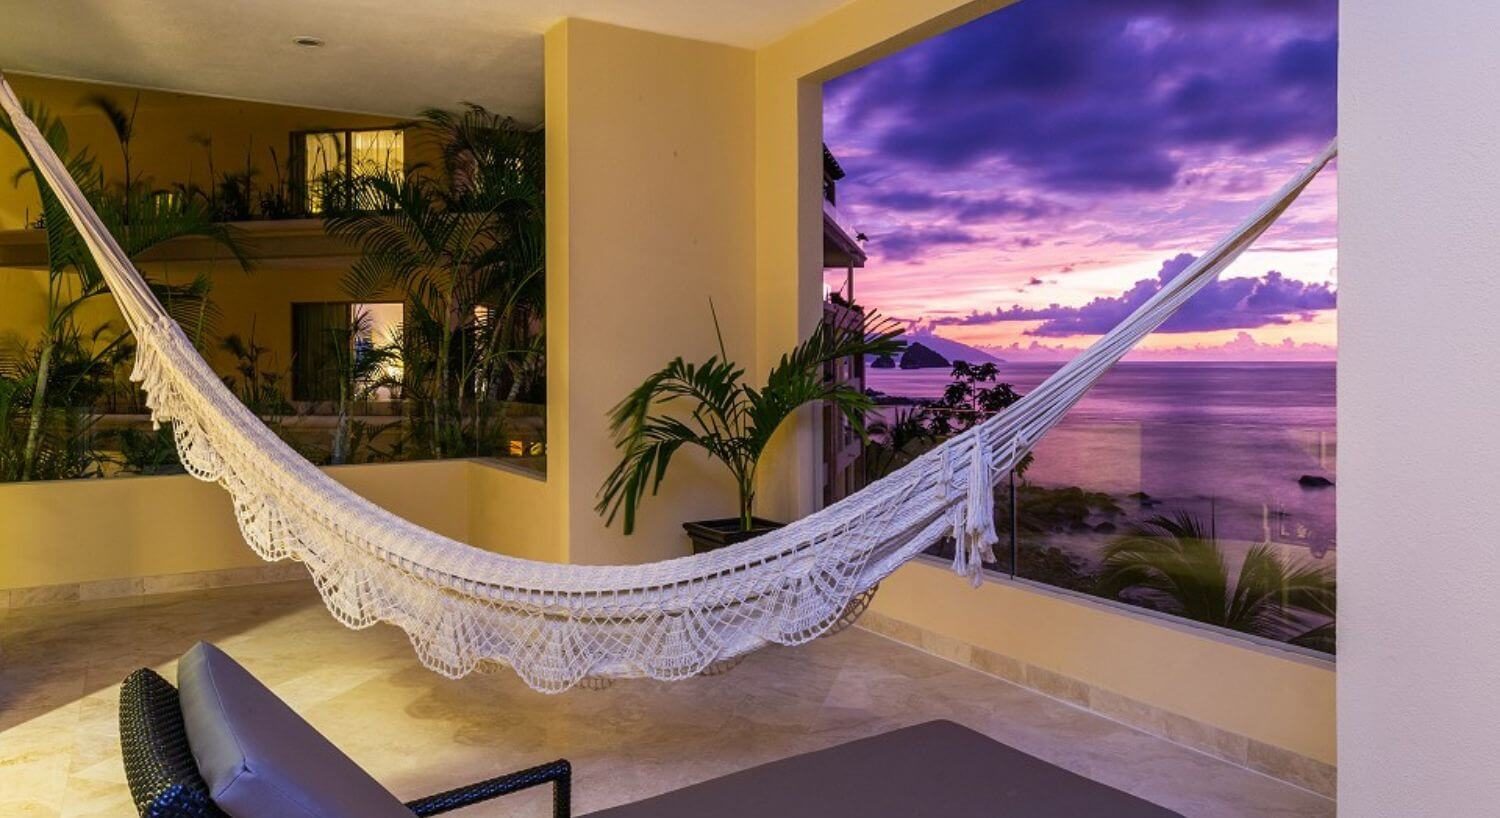 A private balcony with lounge chair and hammock, overlooking the purple sunset over the ocean and another hotel building.